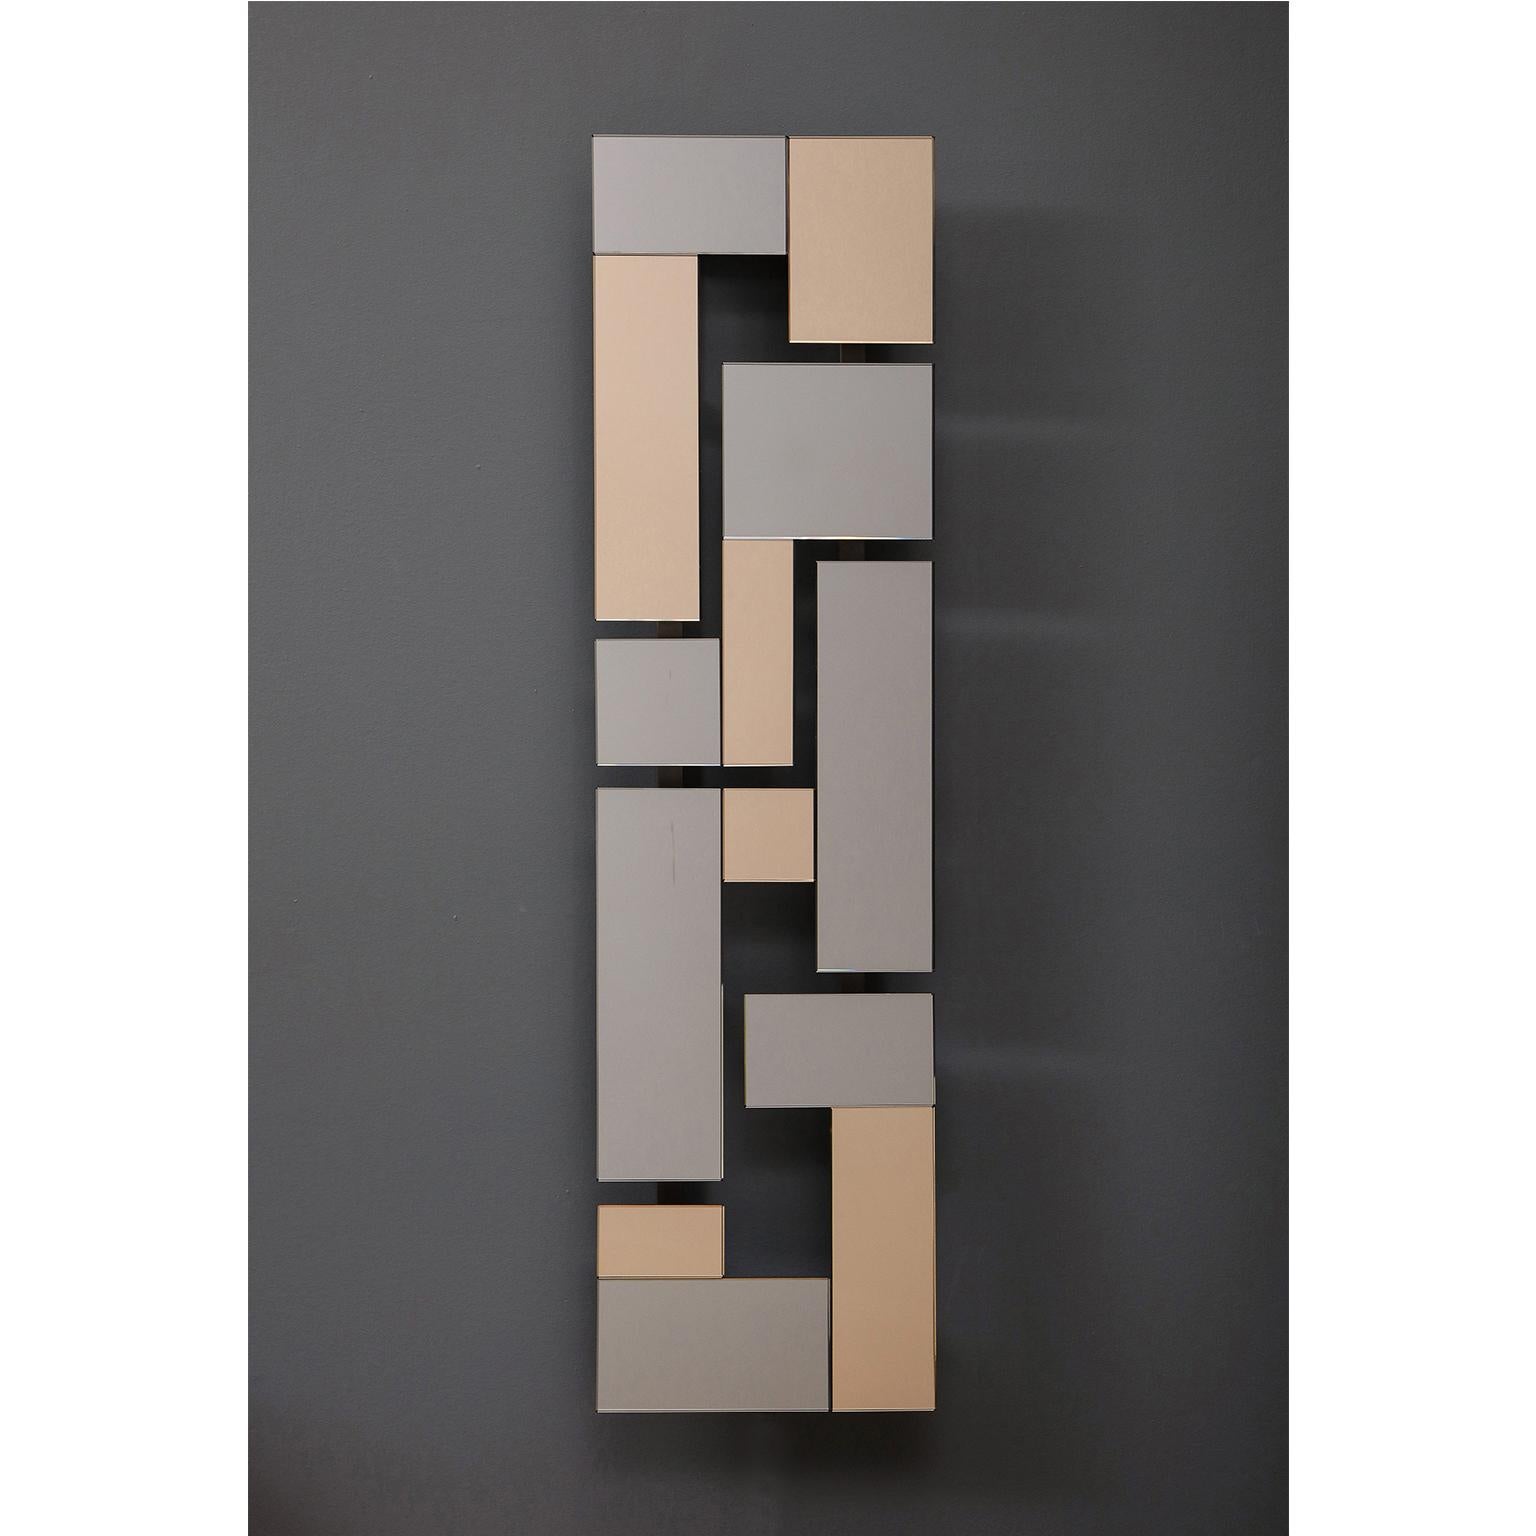 Contemporary, handcrafted, wall sconce in oxidized brass patina base with a façade consisting of rectangular pieces of colored mirrors in geometric formations. LED strip light source on the back side of the sconce


Materials: Brass patina,